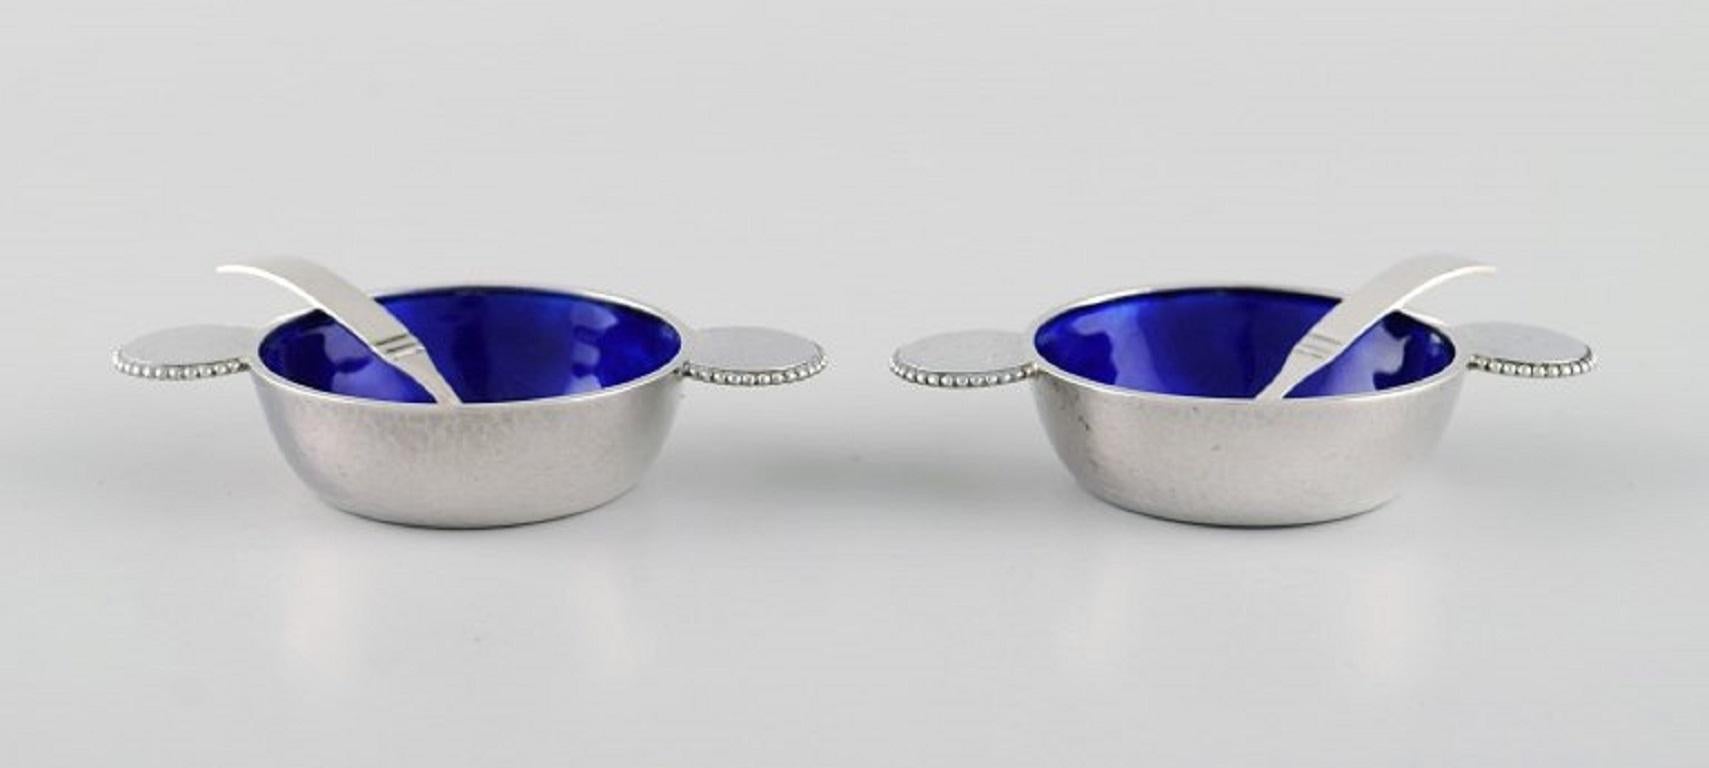 Two rare Evald Nielsen salt vessels in sterling silver with royal blue enamel and pearl border. 
Spoons by Danish silversmith. 
1920/30's.
The salt vessel measures: 7.8 x 1.5 cm.
Spoon length: 5.5 cm.
In excellent condition.
Stamped.